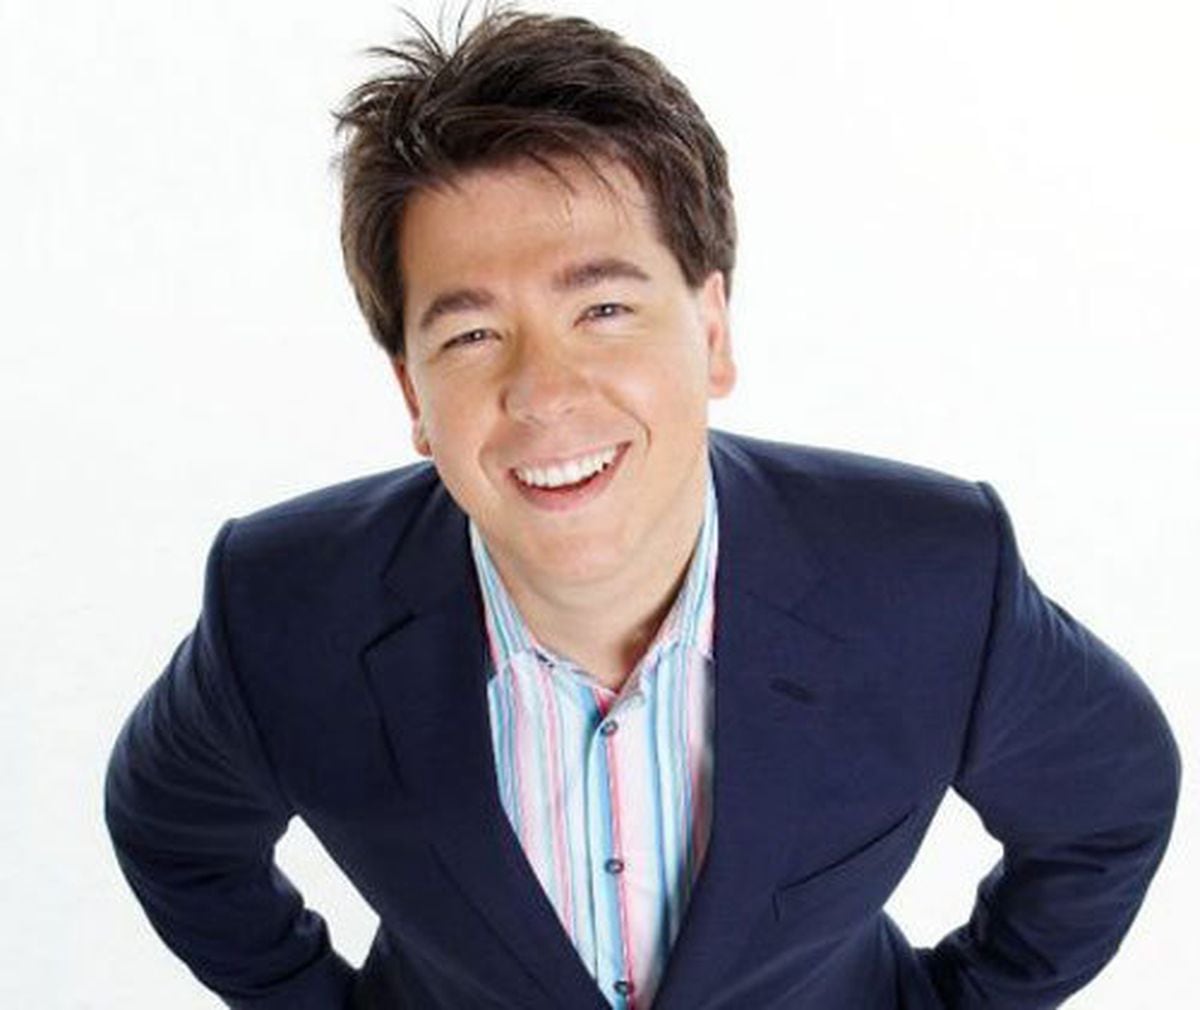 michael mcintyre tours in order